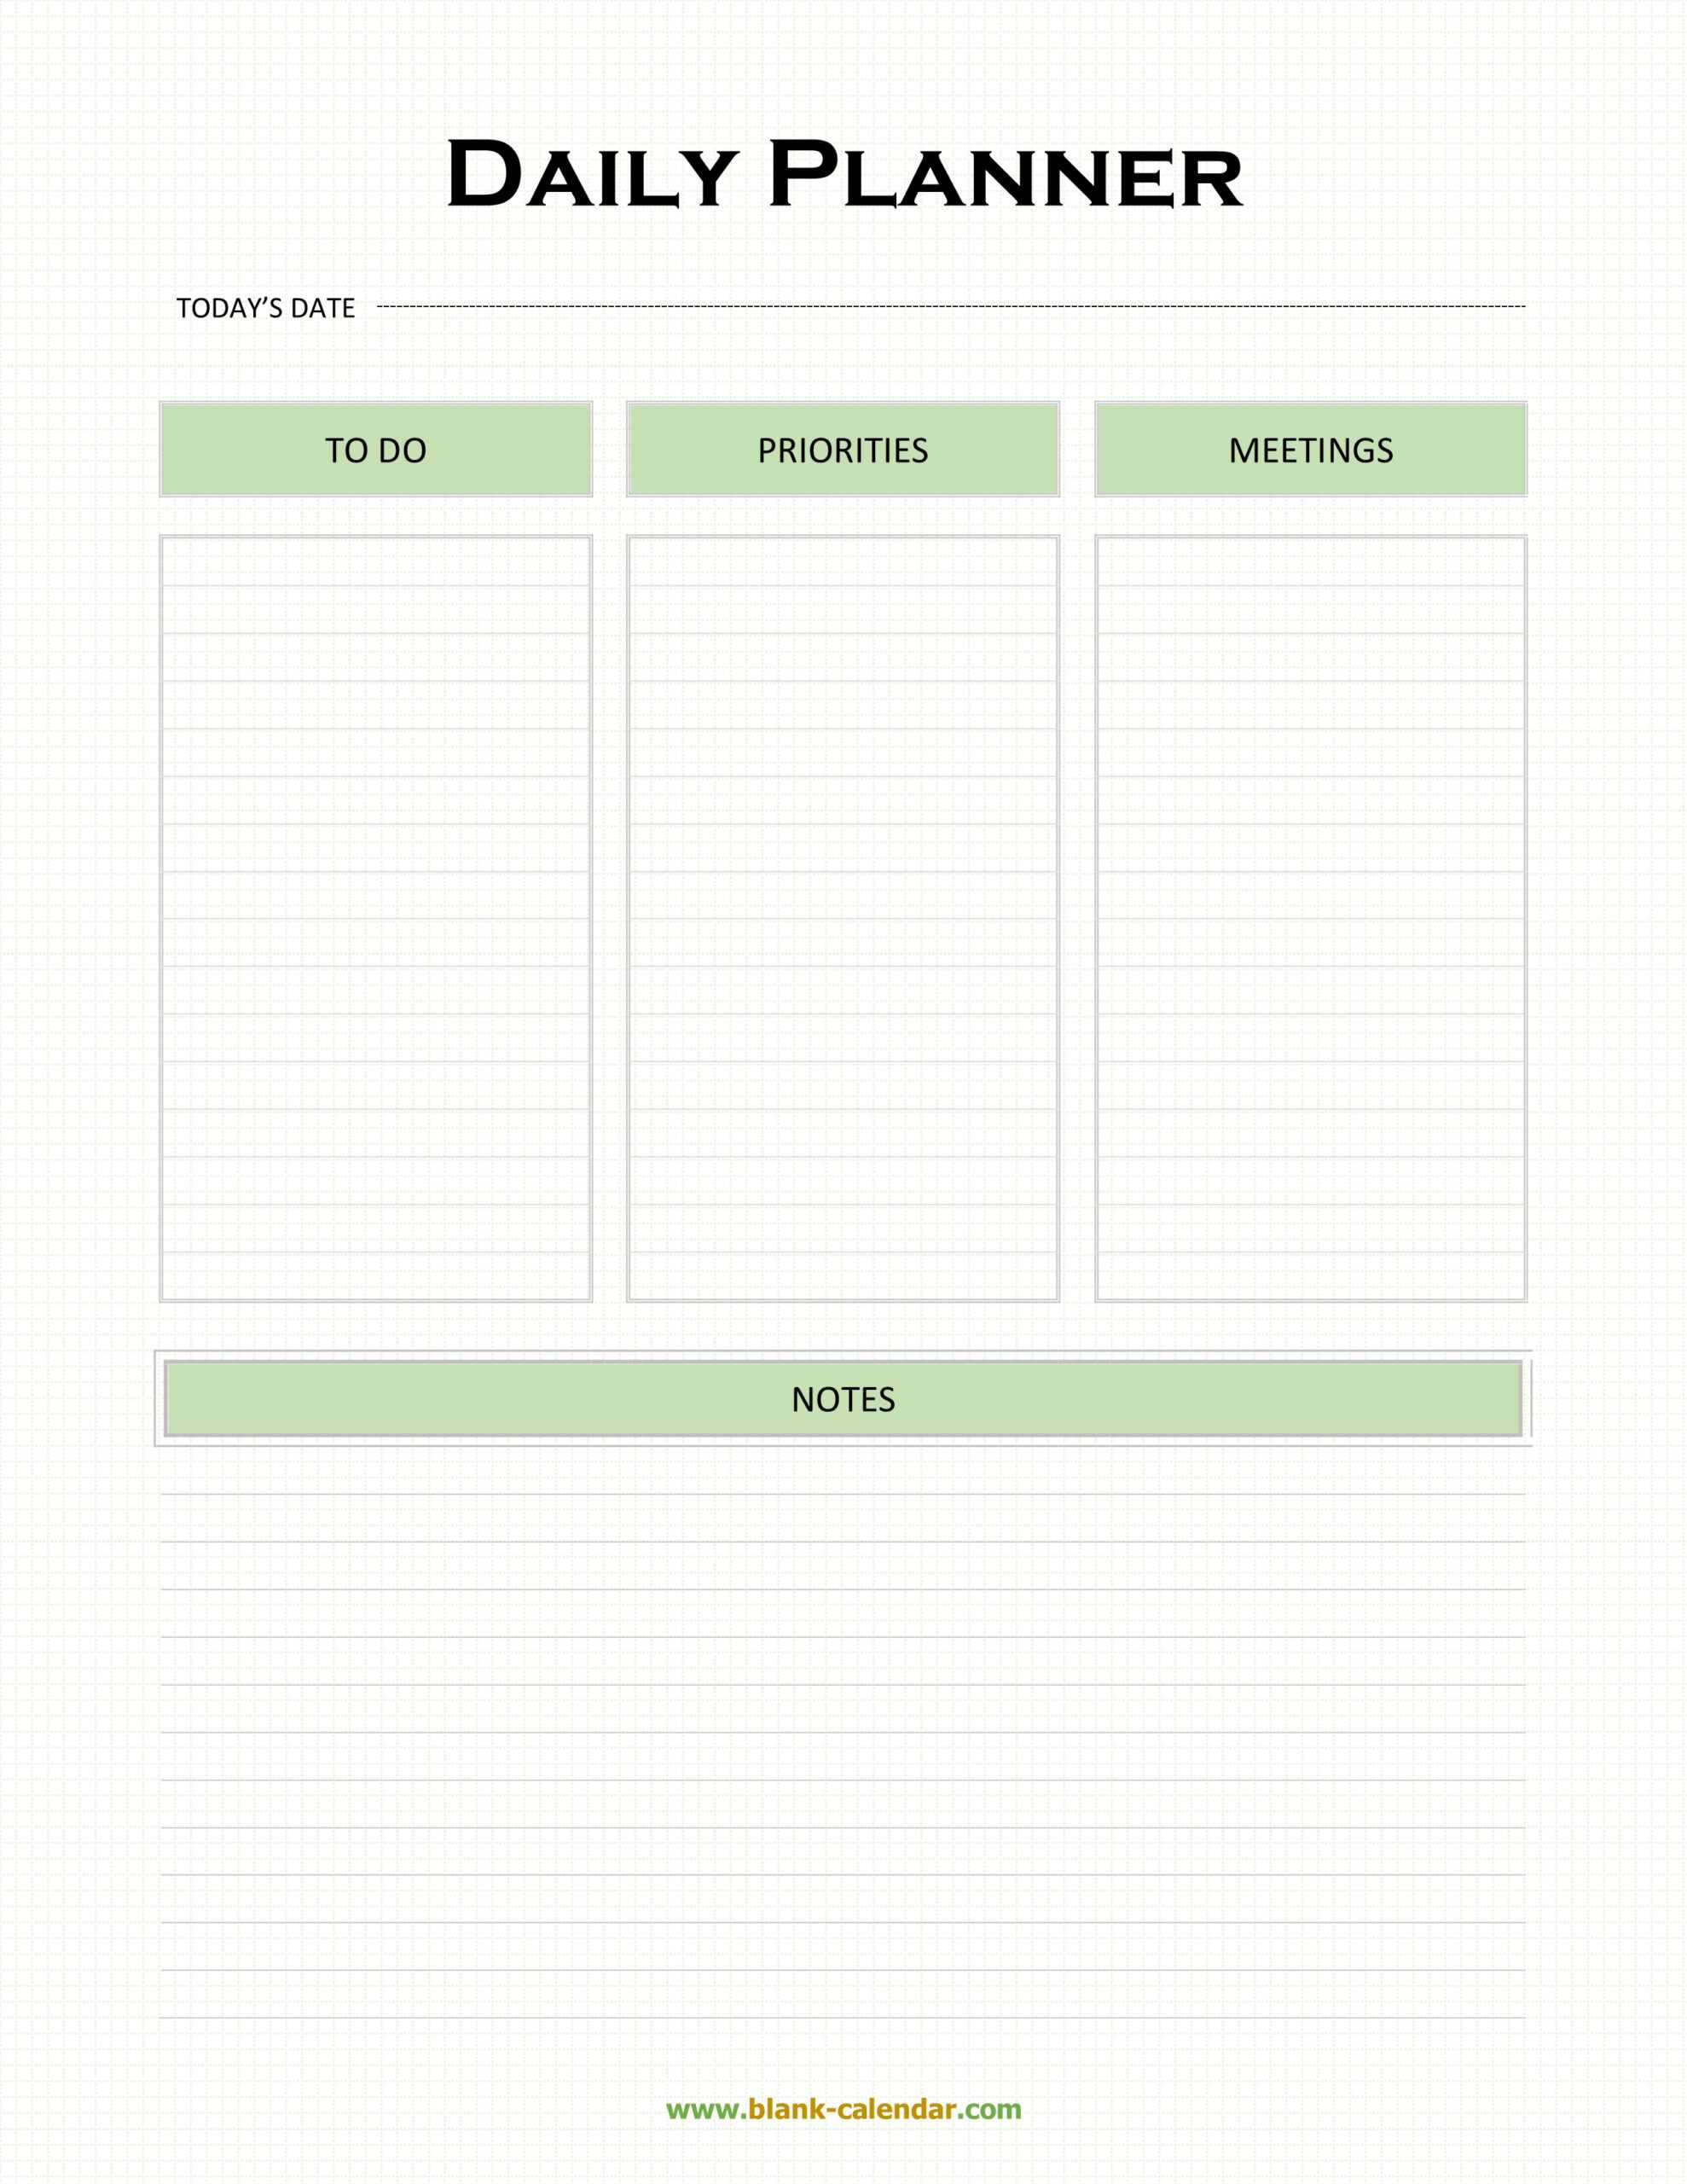 Daily Planner Templates (Word, Excel, Pdf) Inside Printable Blank Daily Schedule Template